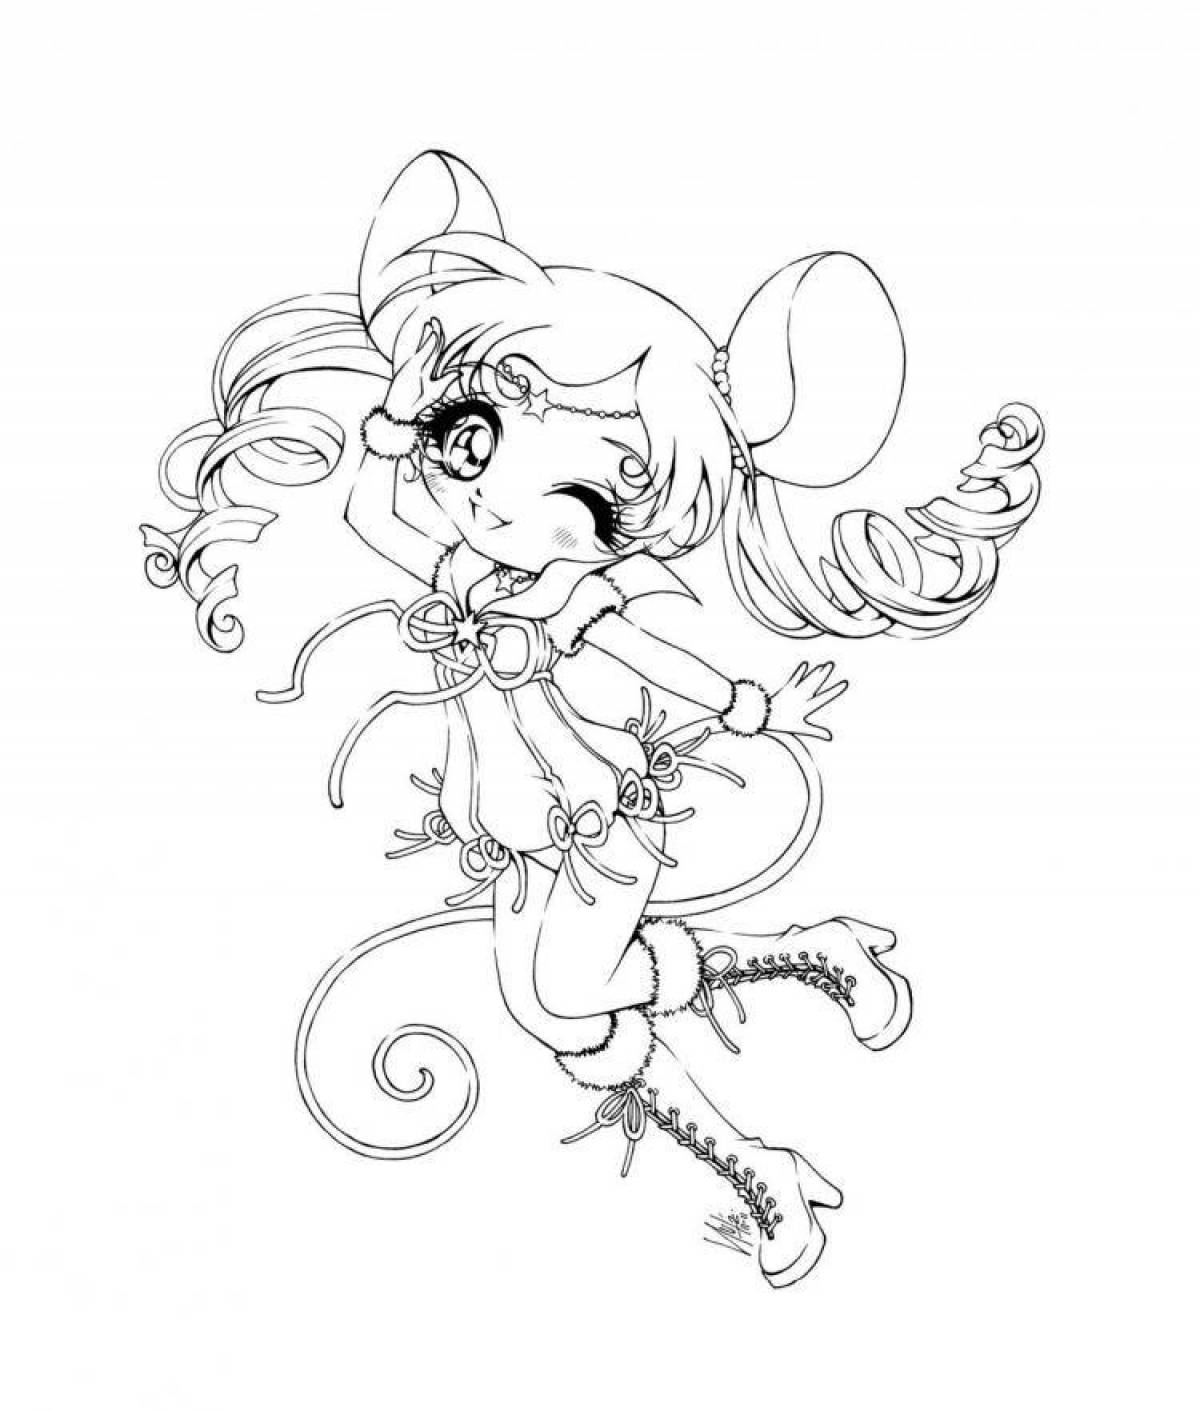 Chibi freaky anime coloring book